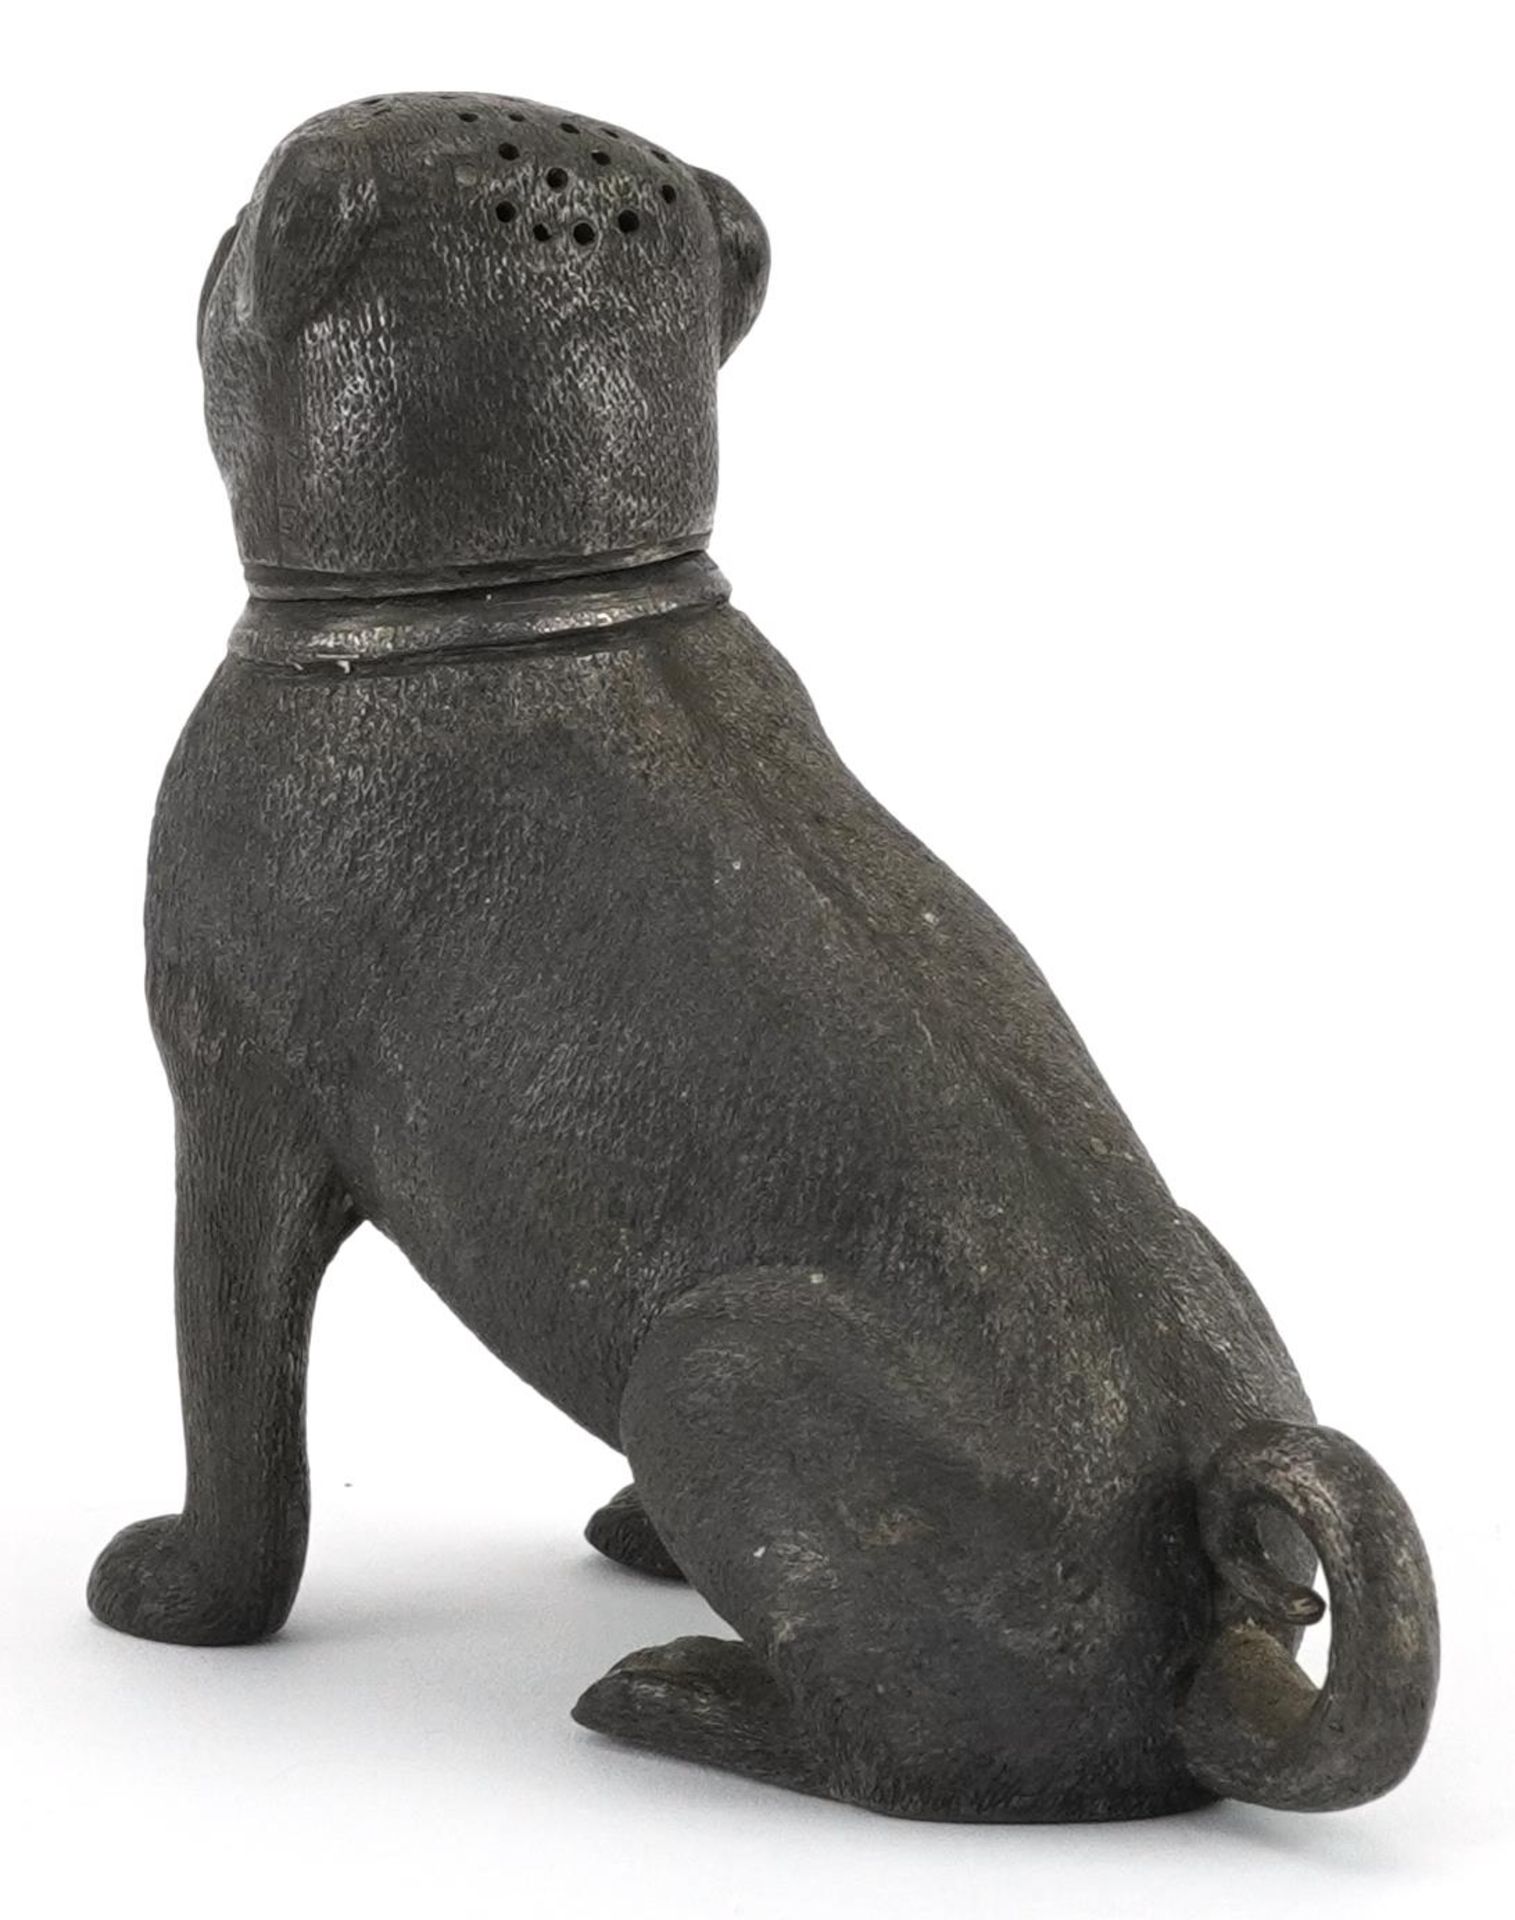 Novelty pewter caster in the form of a Bulldog with red glass eyes, 10cm high : For further - Image 2 of 3